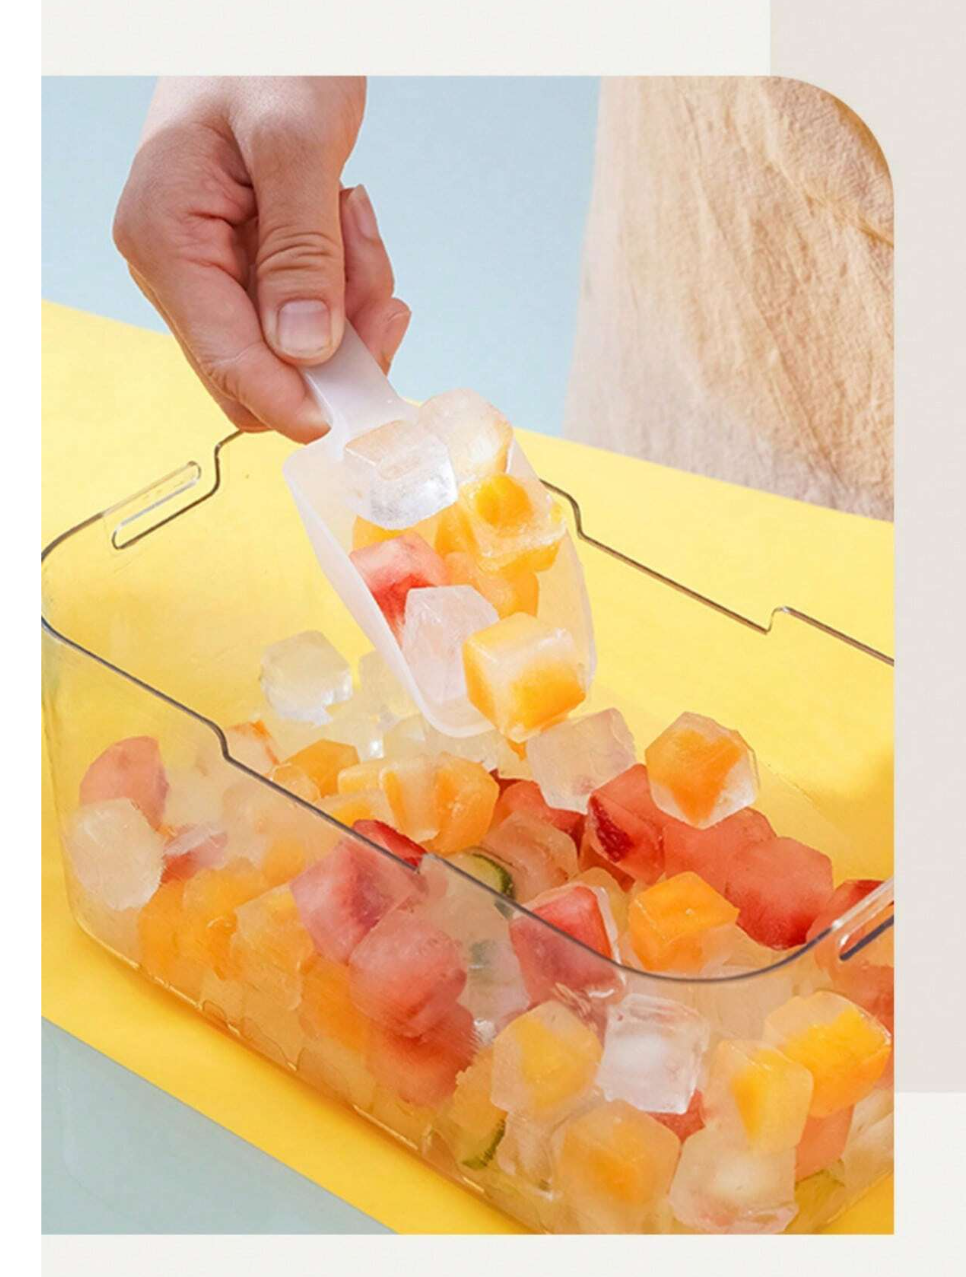 Frosty Creations: Innovative Ice Cube Tray and Mold with Lid for Household Ice Making!